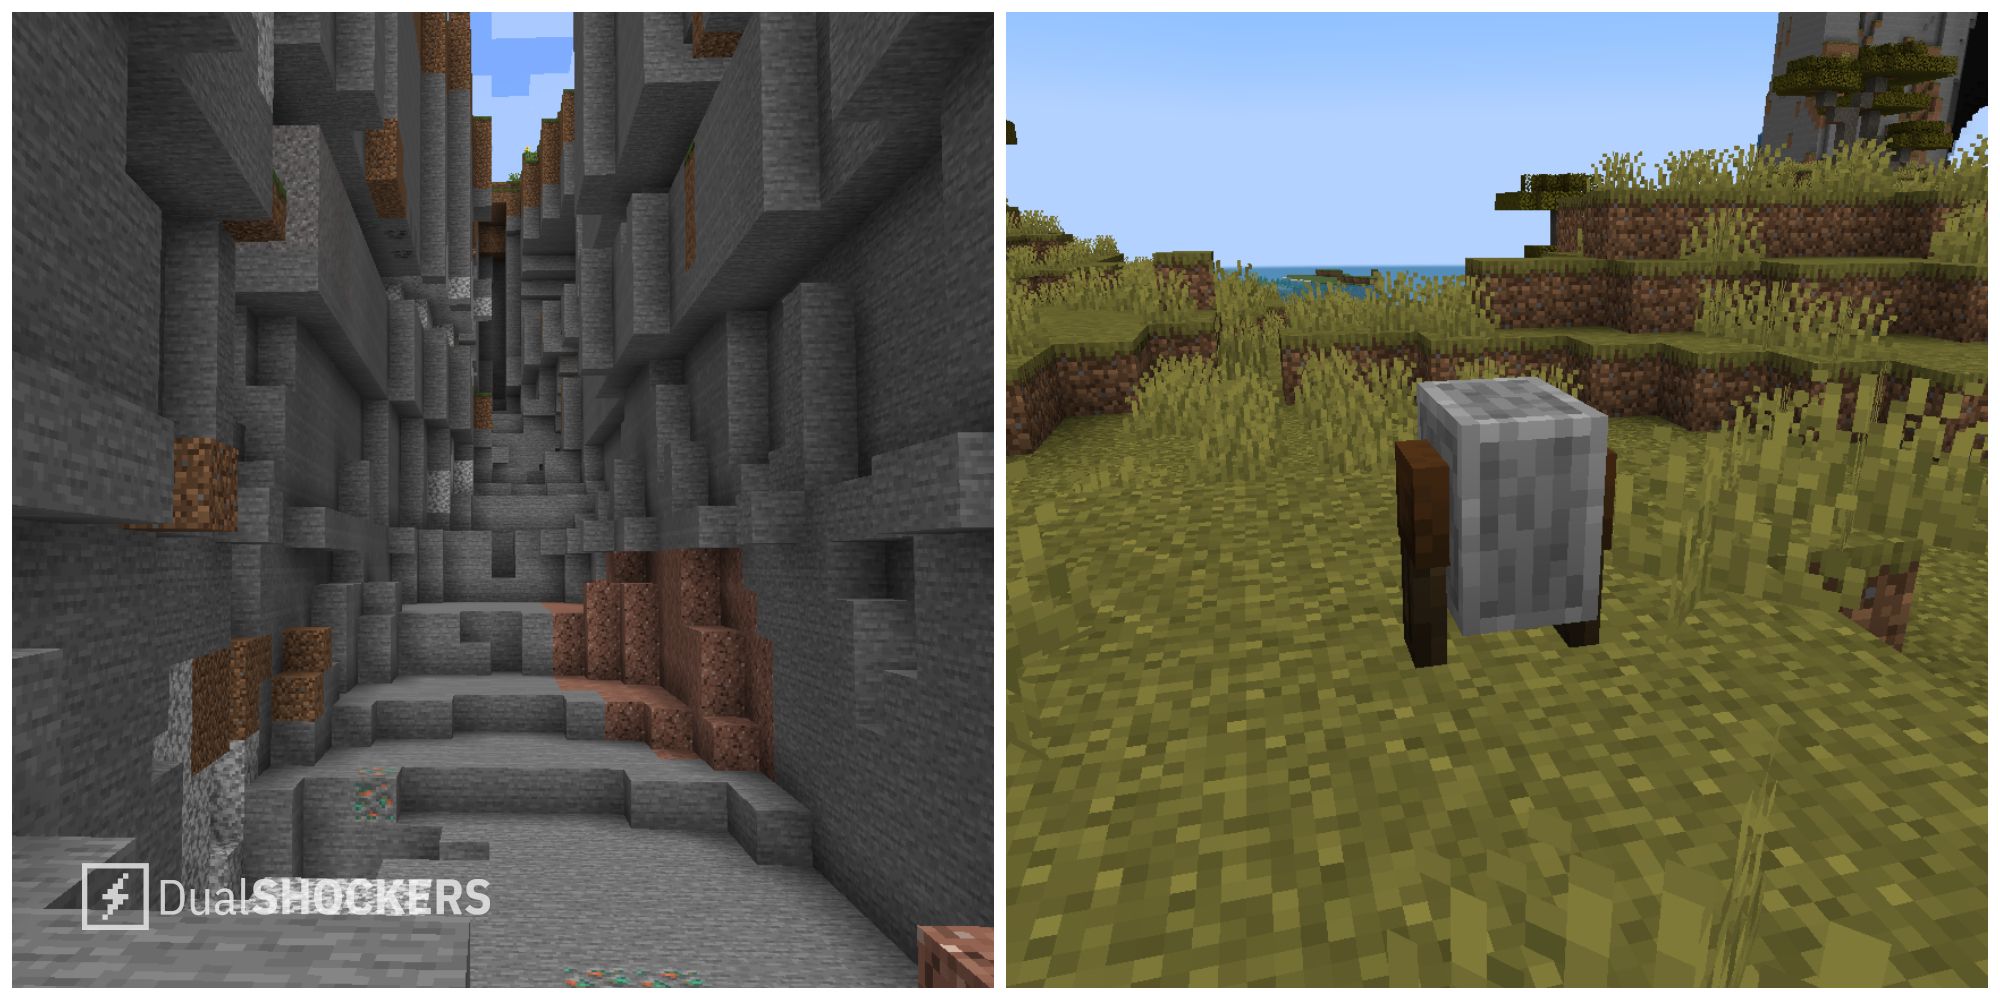 Split image of a cave and a Grindstone in Minecraft.